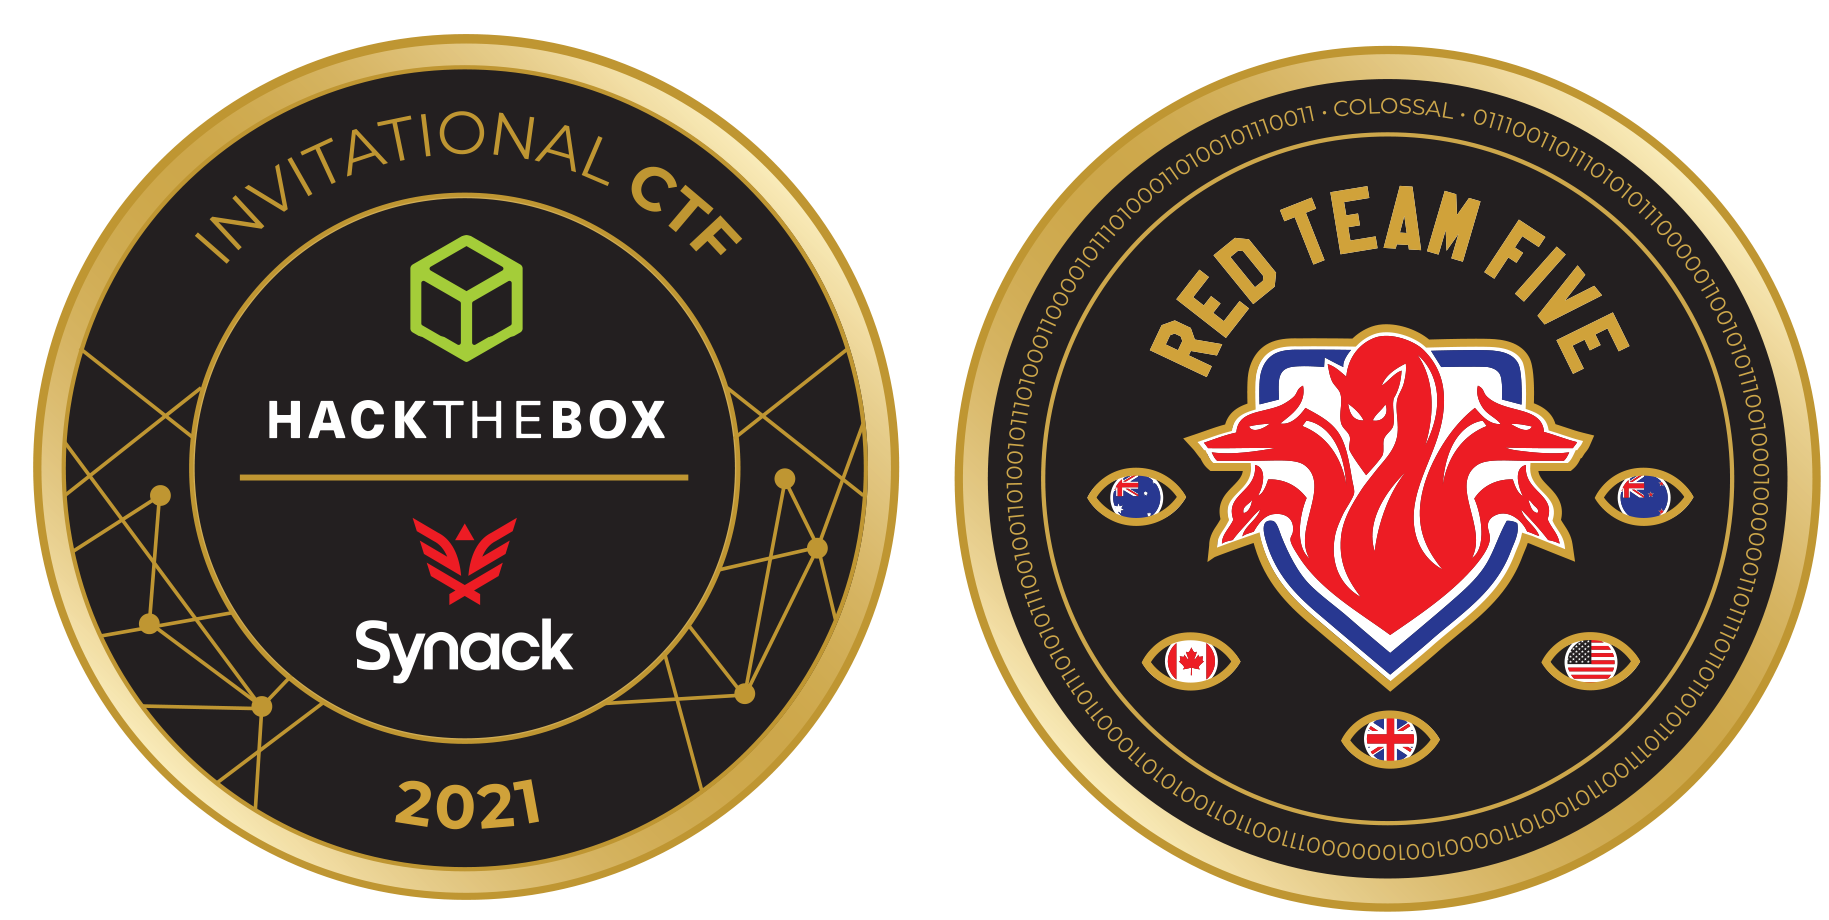 synack-redteamfive-invitational-challenge-coin-2021